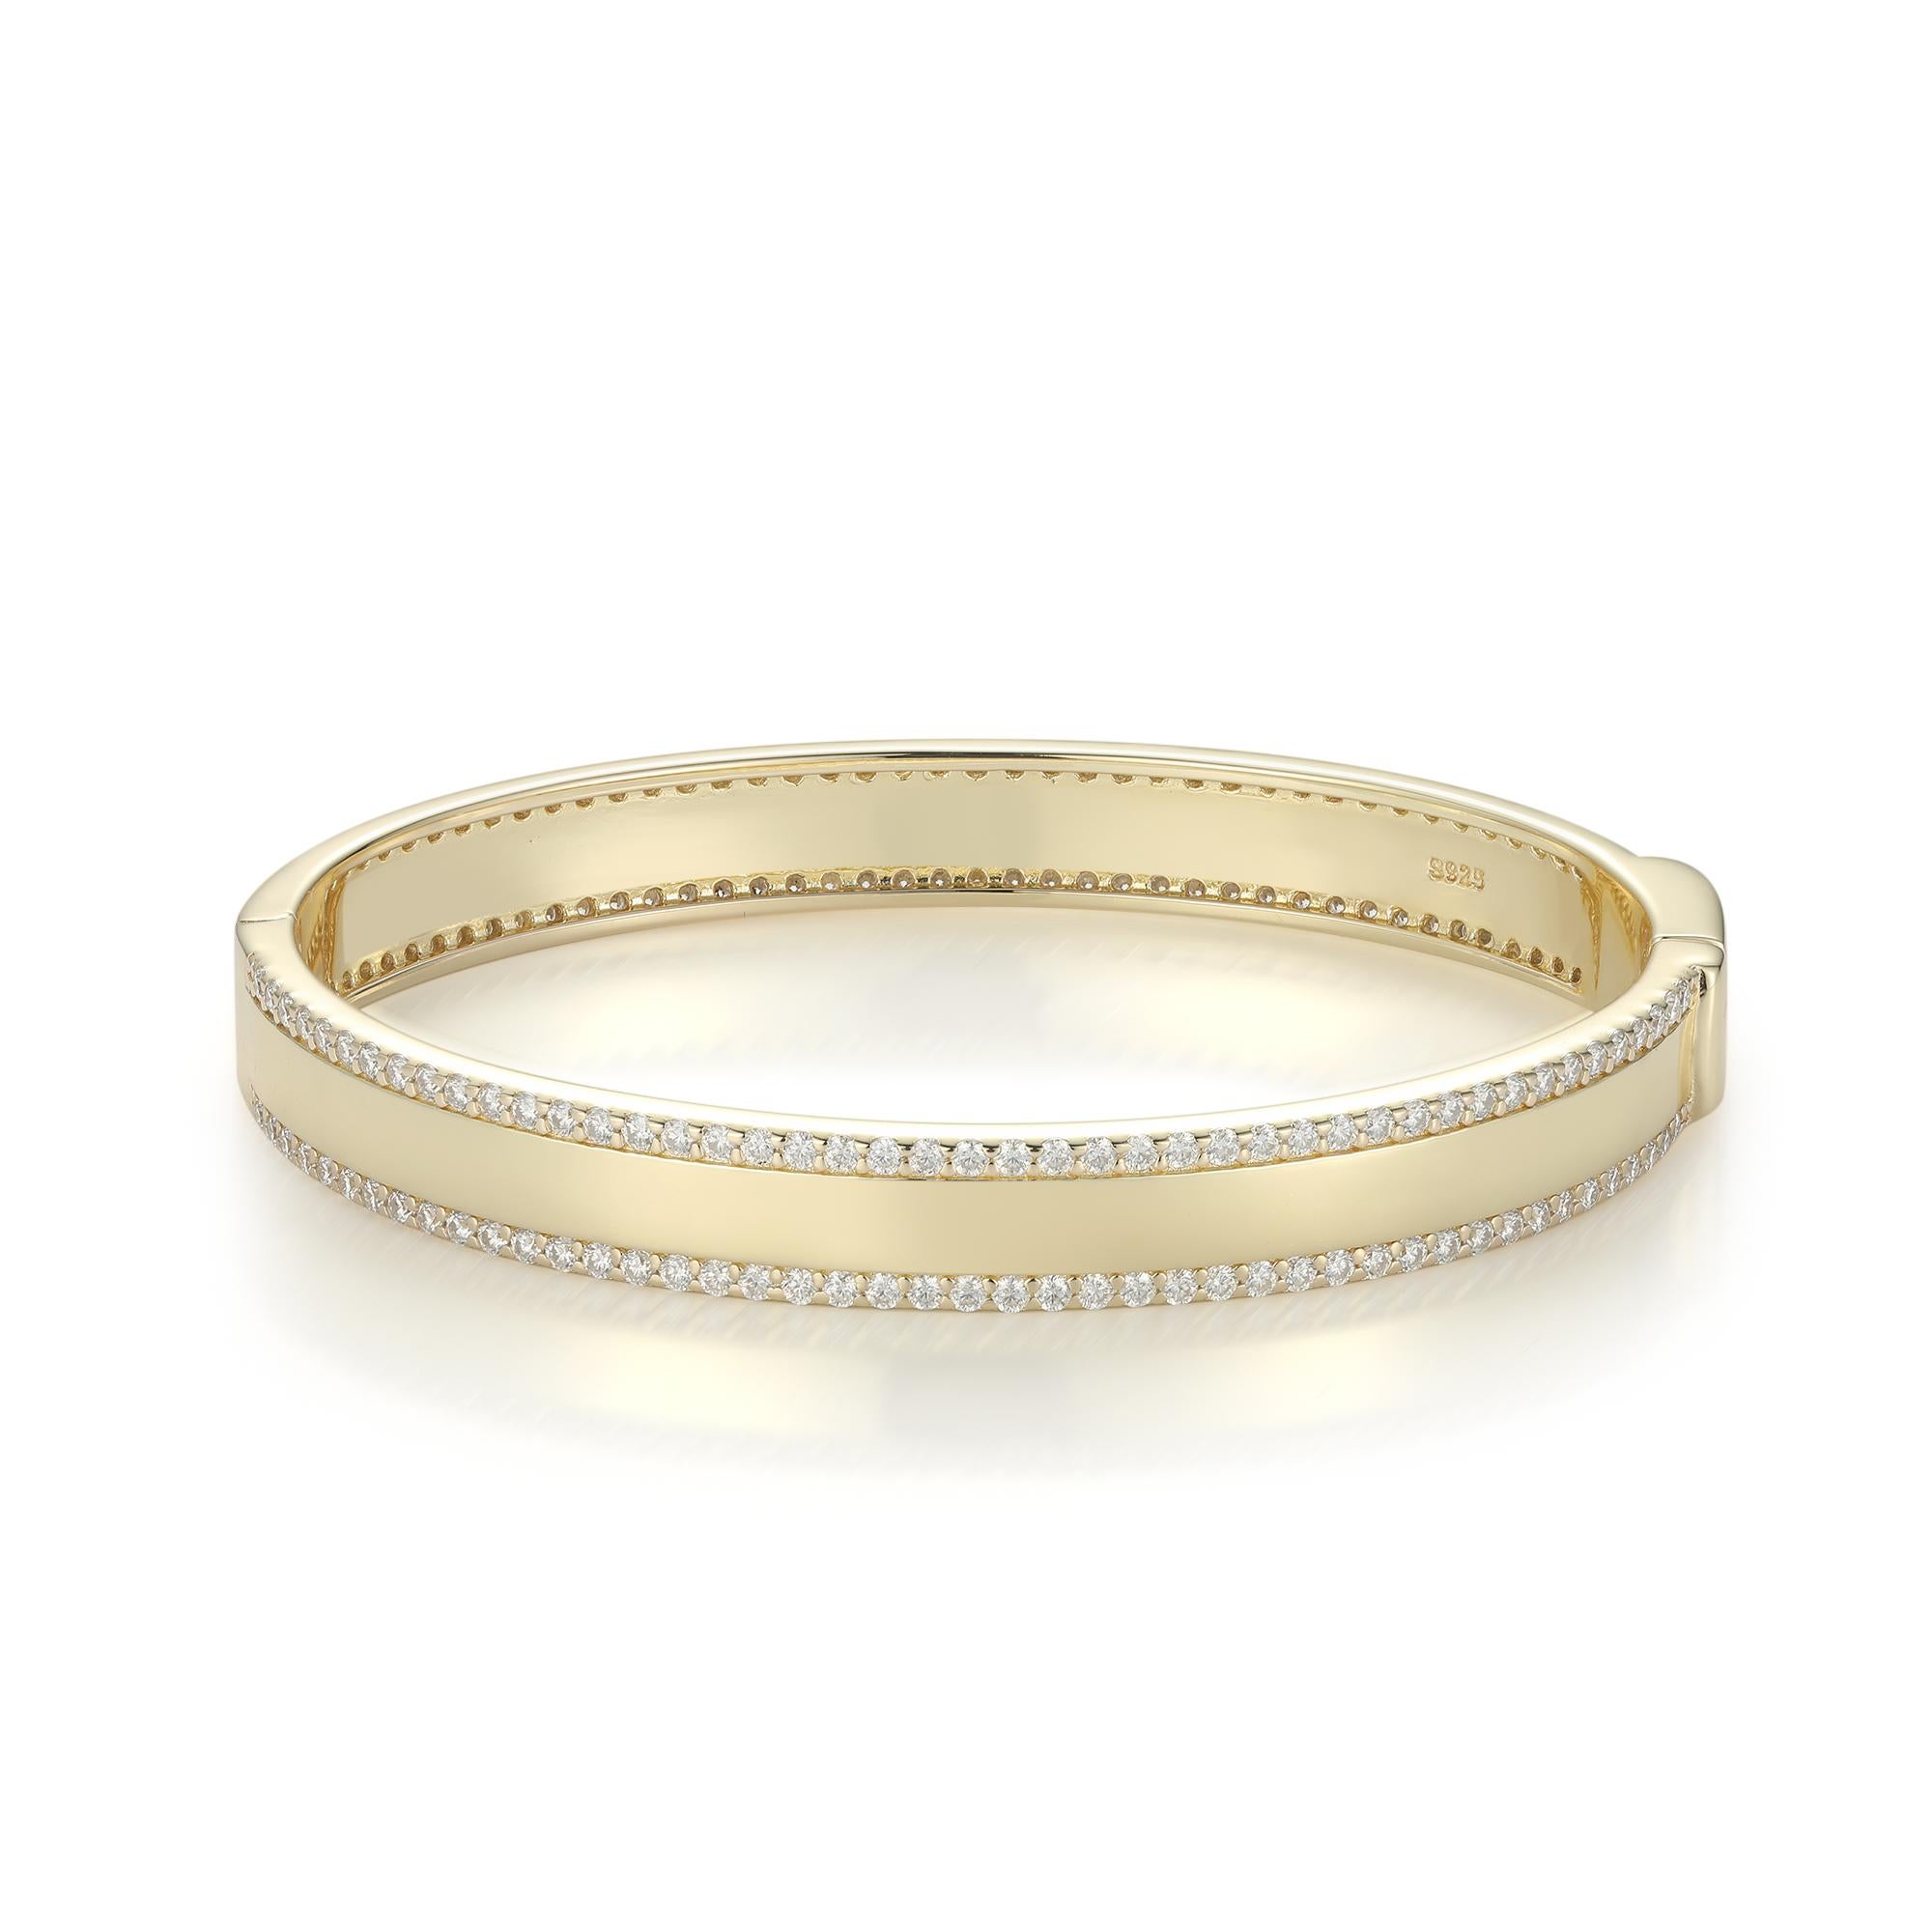 Our most stackable diamond bangle! The Diamond ID Bangle has approximately 170 pcs of shimmering white diamonds outline this golden bracelet. Sparkle with elegance while wearing this classic bangle.

Bracelet Information
Diamond Type : Natural